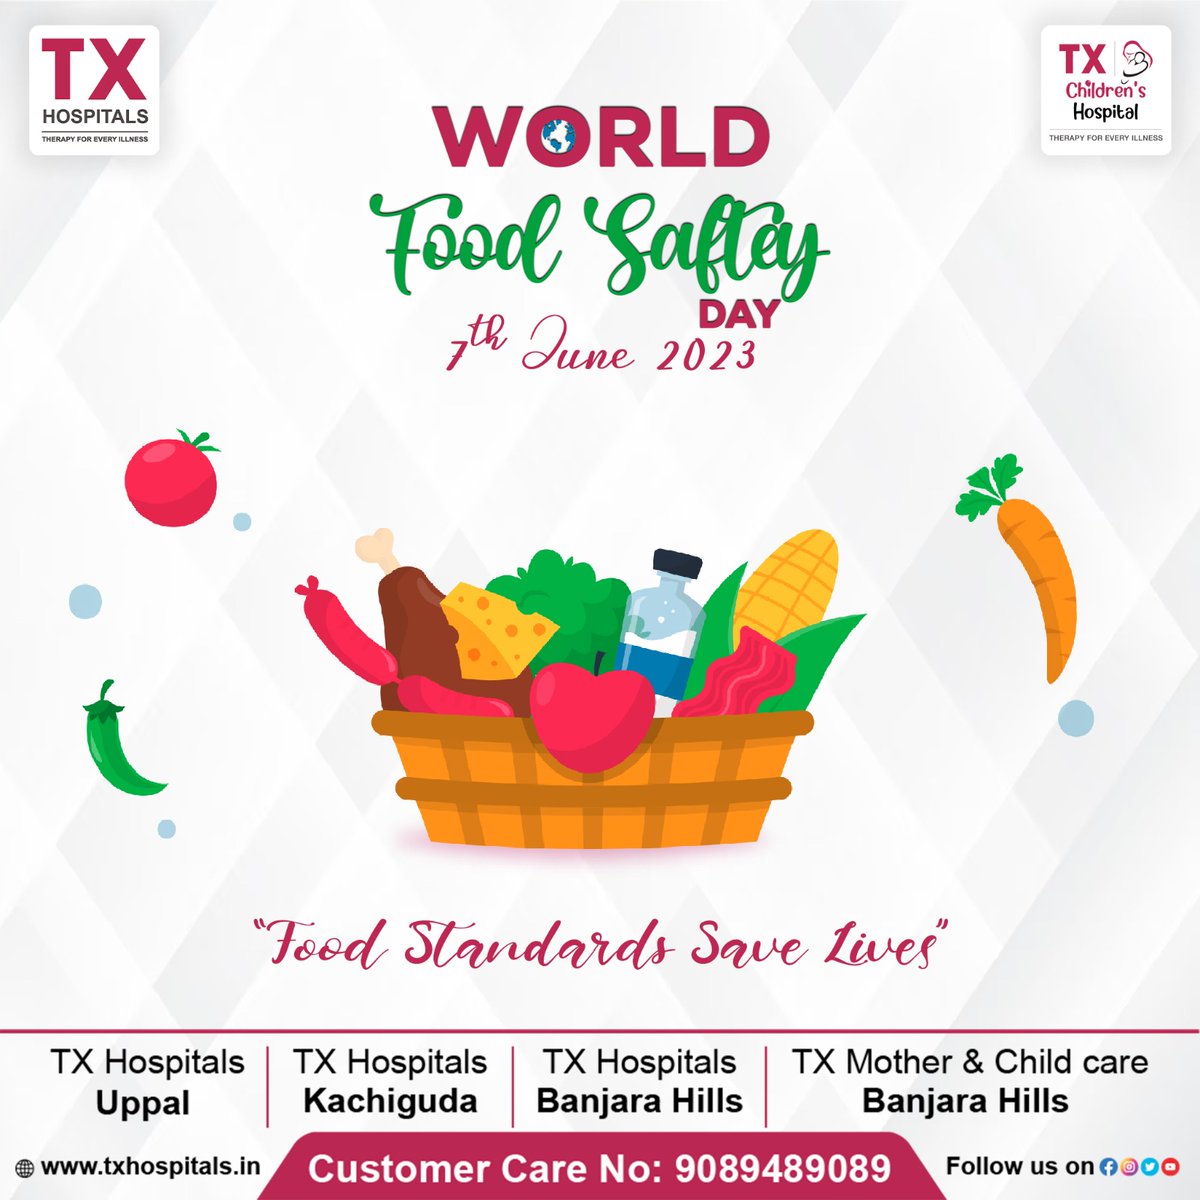 🌍 It's World Food Safety Day! 🍽️ Let's prioritize #FoodStandardsSaveLives and ensure a healthier future for all. 🛡️✅

#WorldFoodSafetyDay #SafeFoodForAll #TXHospitals #HealthCare